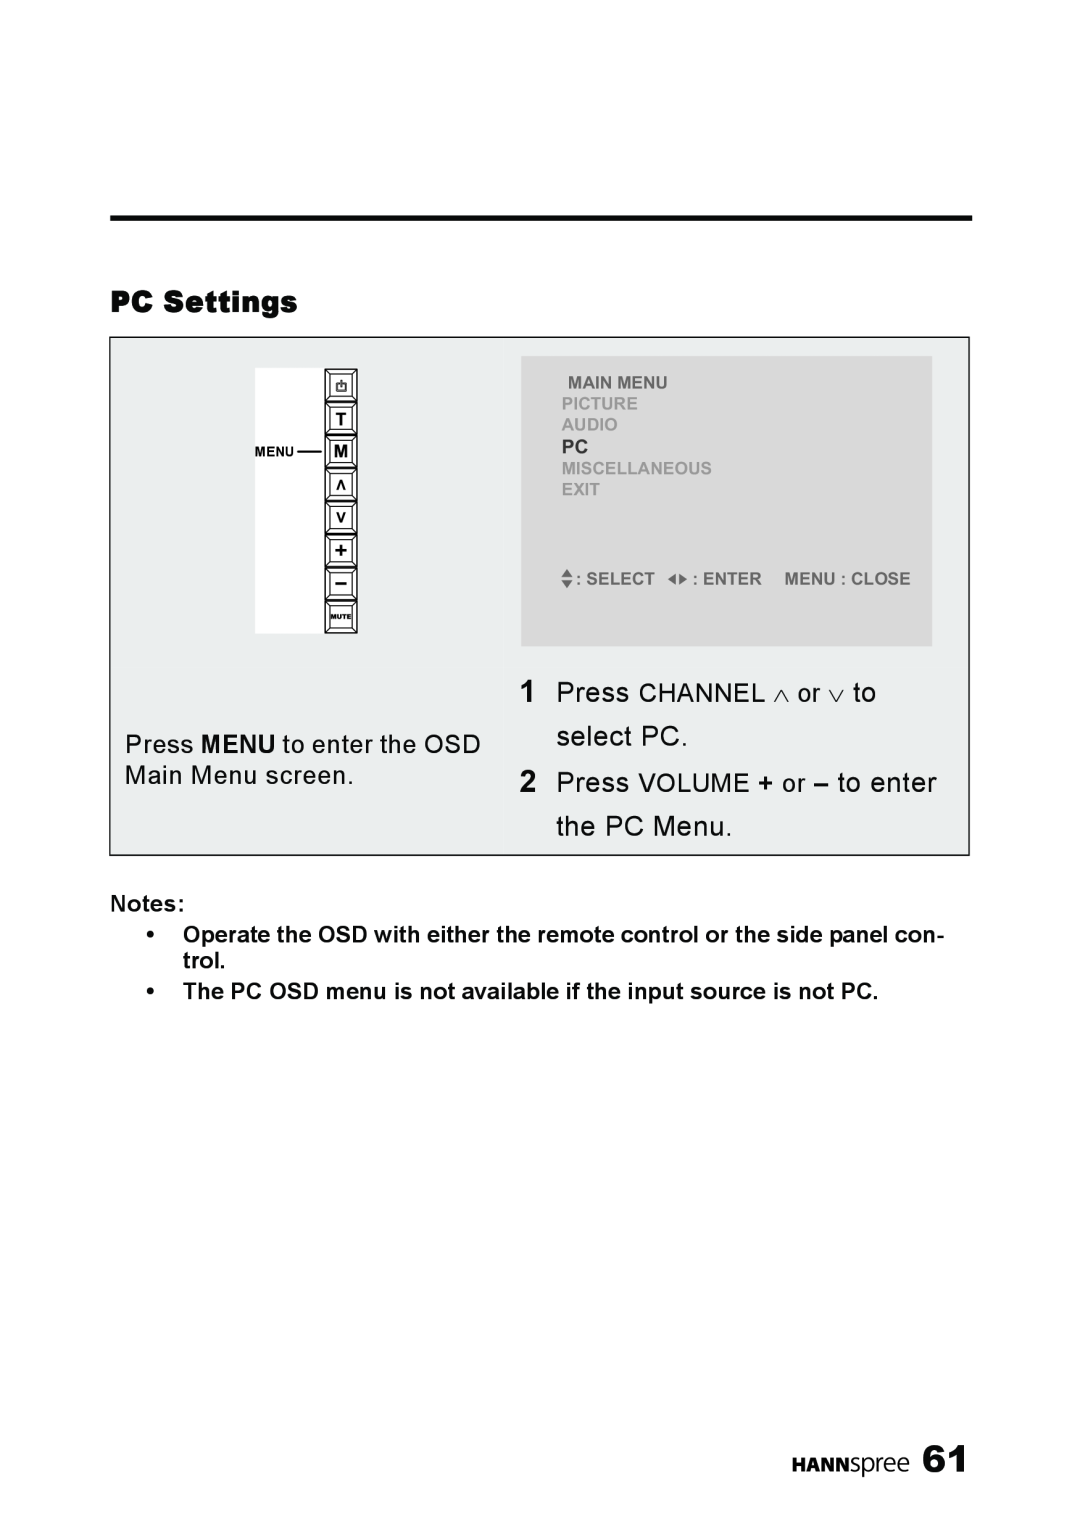 HANNspree LT11-23A1 PC Settings, The PC OSD menu is not available if the input source is not PC, Main Menu, Picture Audio 